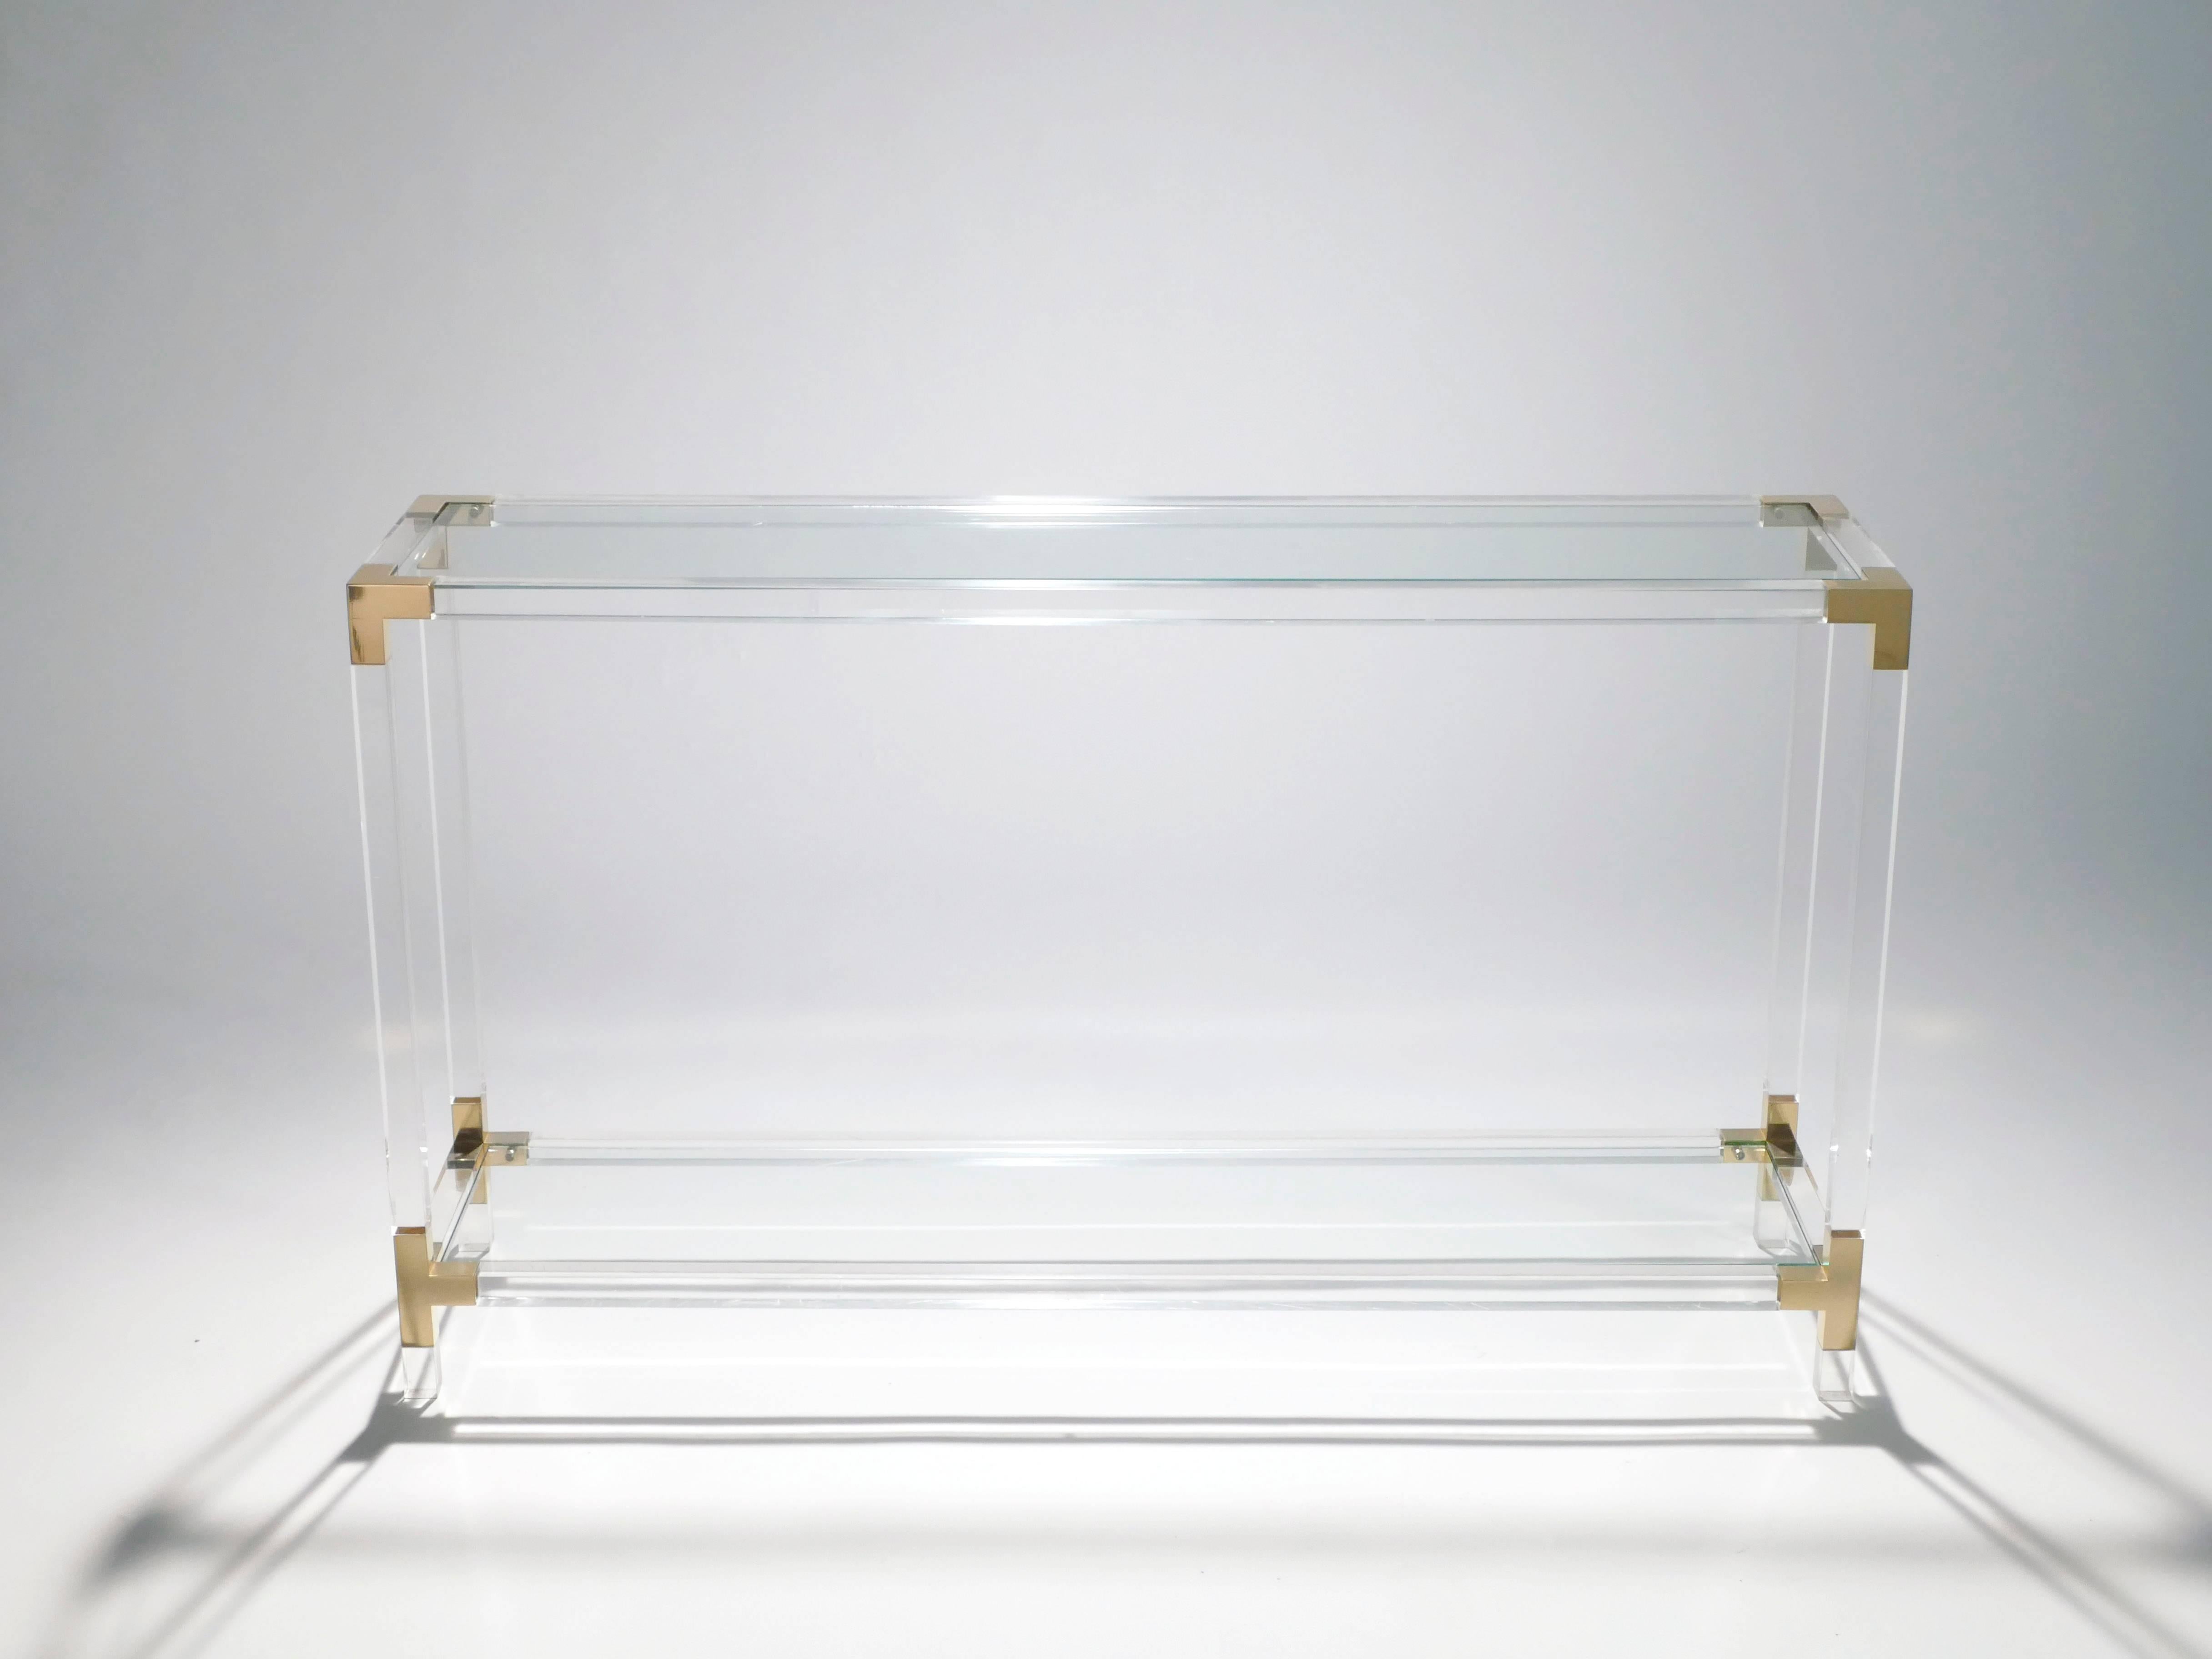 Infuse your space with a cool levity with this transparent console table, built almost entirely from plexiglass and glass. Its quality brass accents feel luxurious, while the rest of the piece gently reflects light. This Maison Jansen piece is a